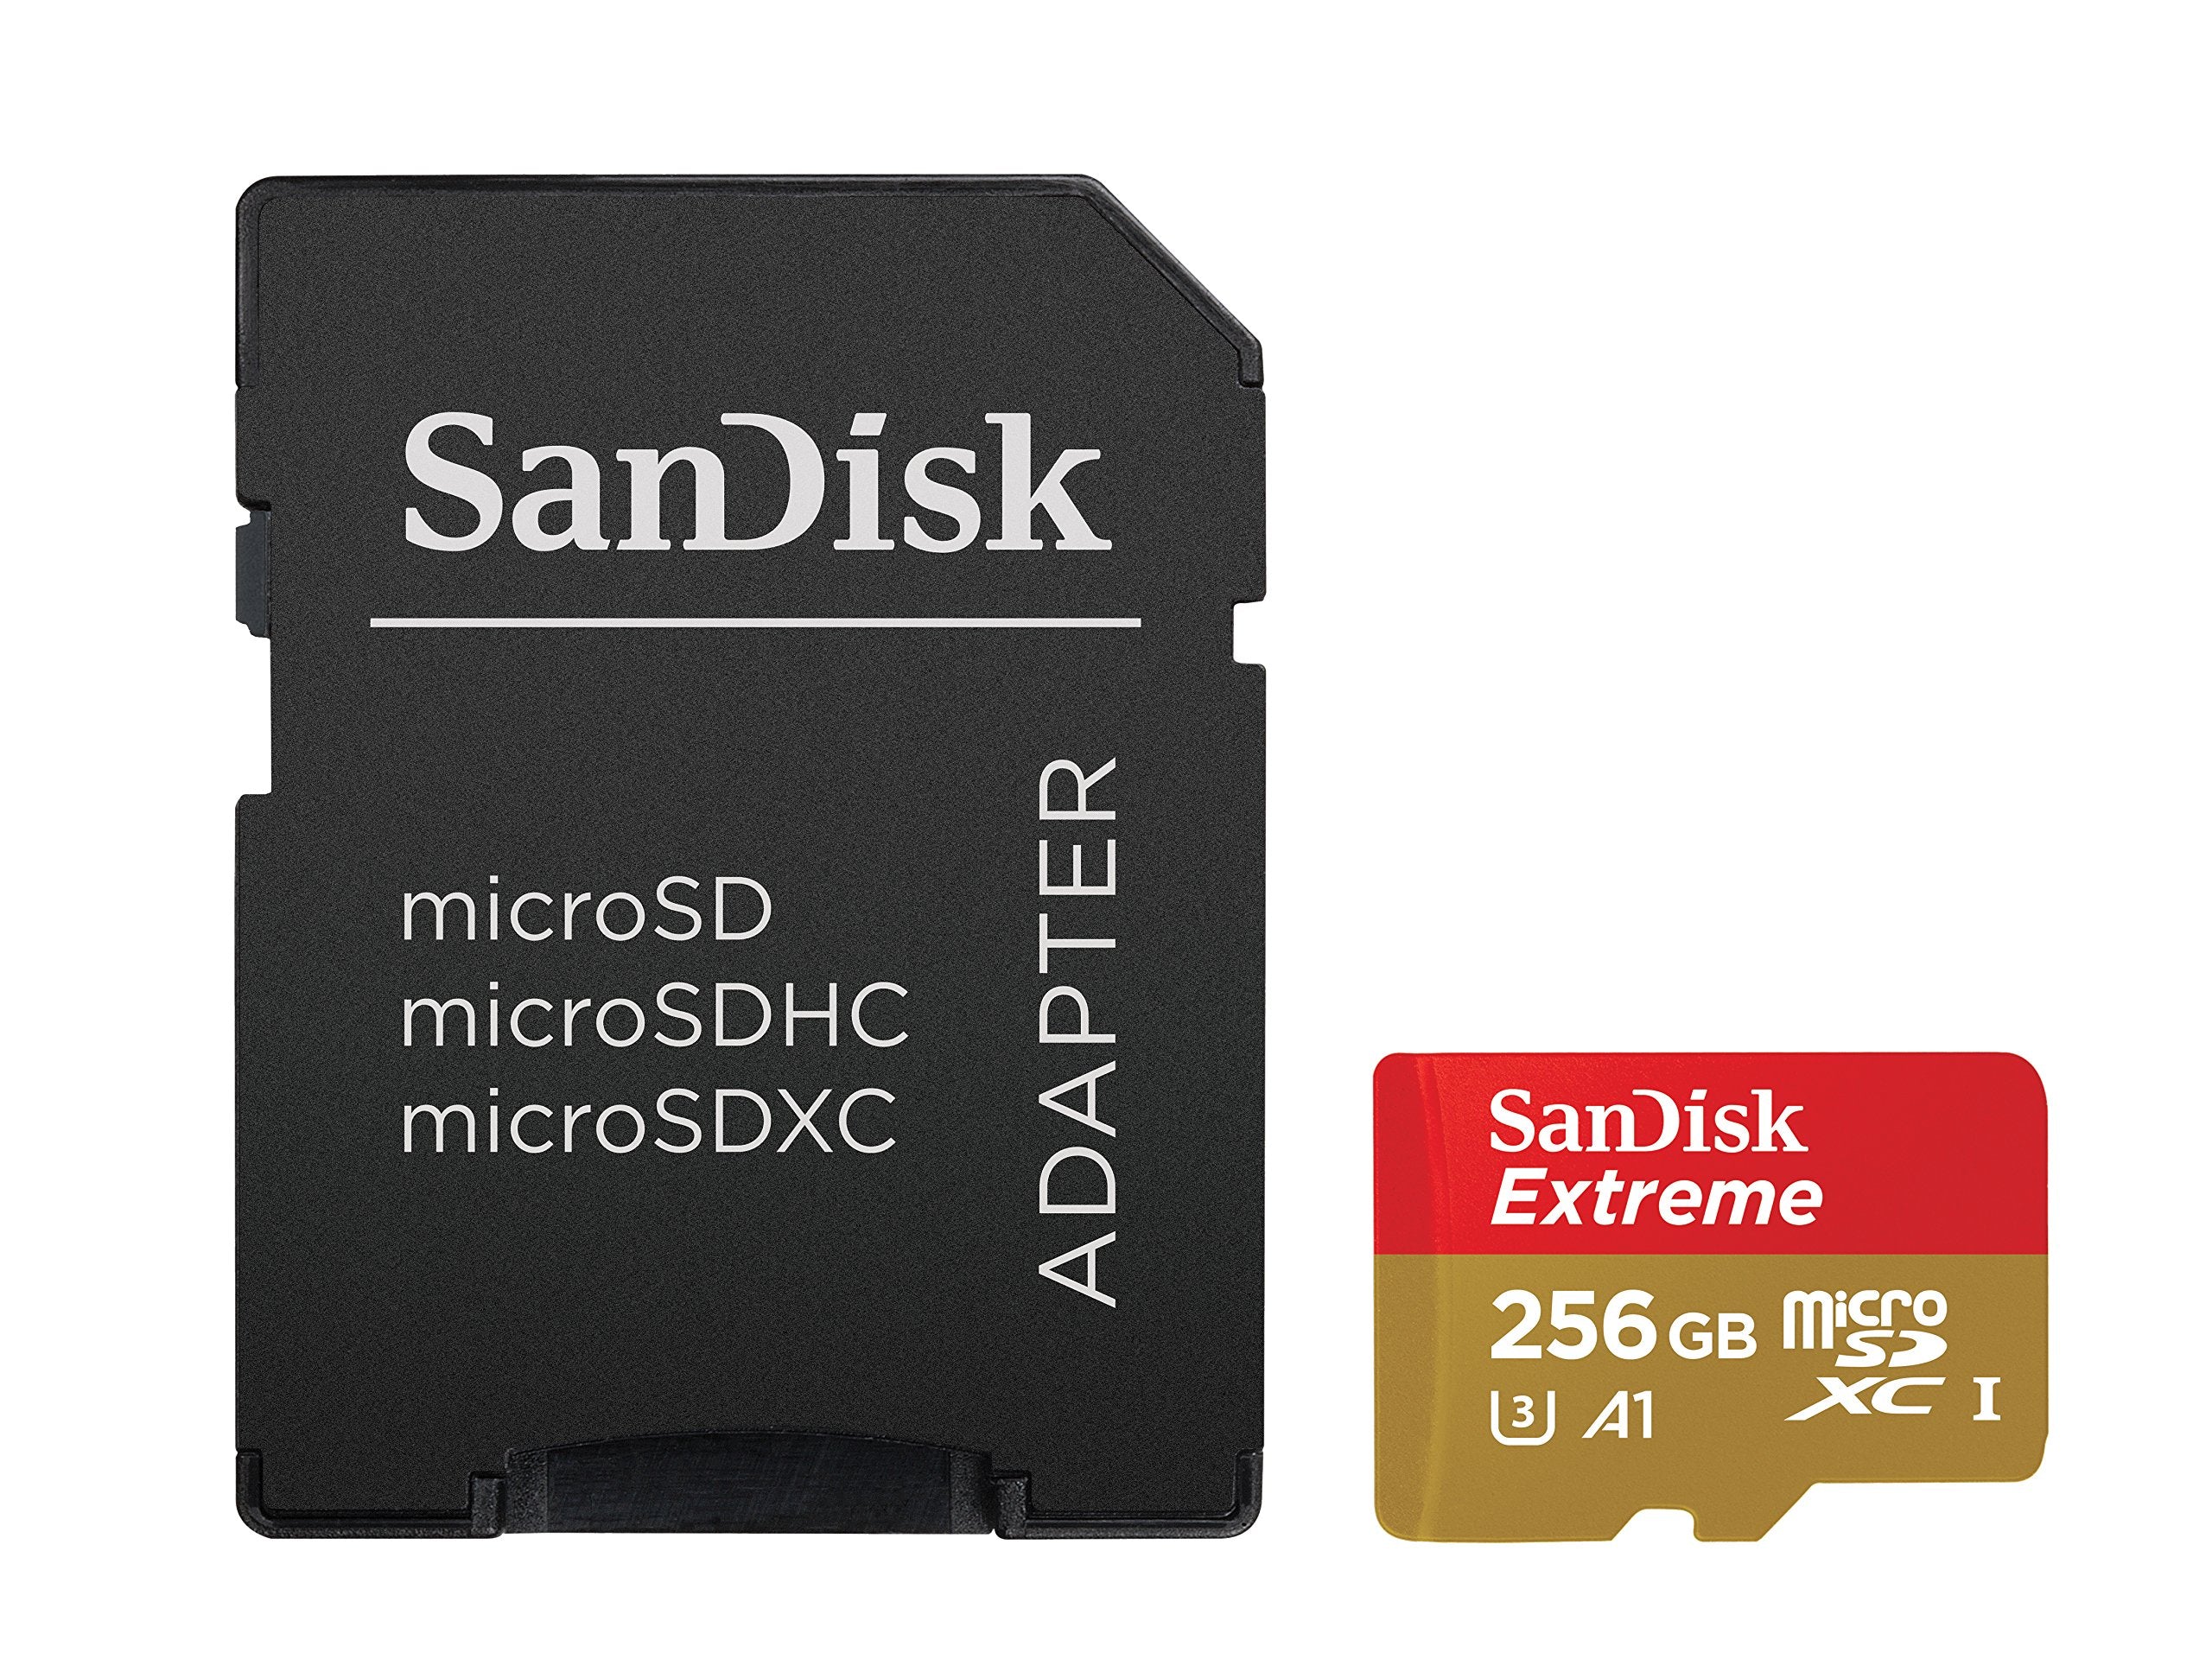 SanDisk Extreme 256GB microSDXC UHS-I Card with Adapter - SDSQXAO-256G-GN6MA